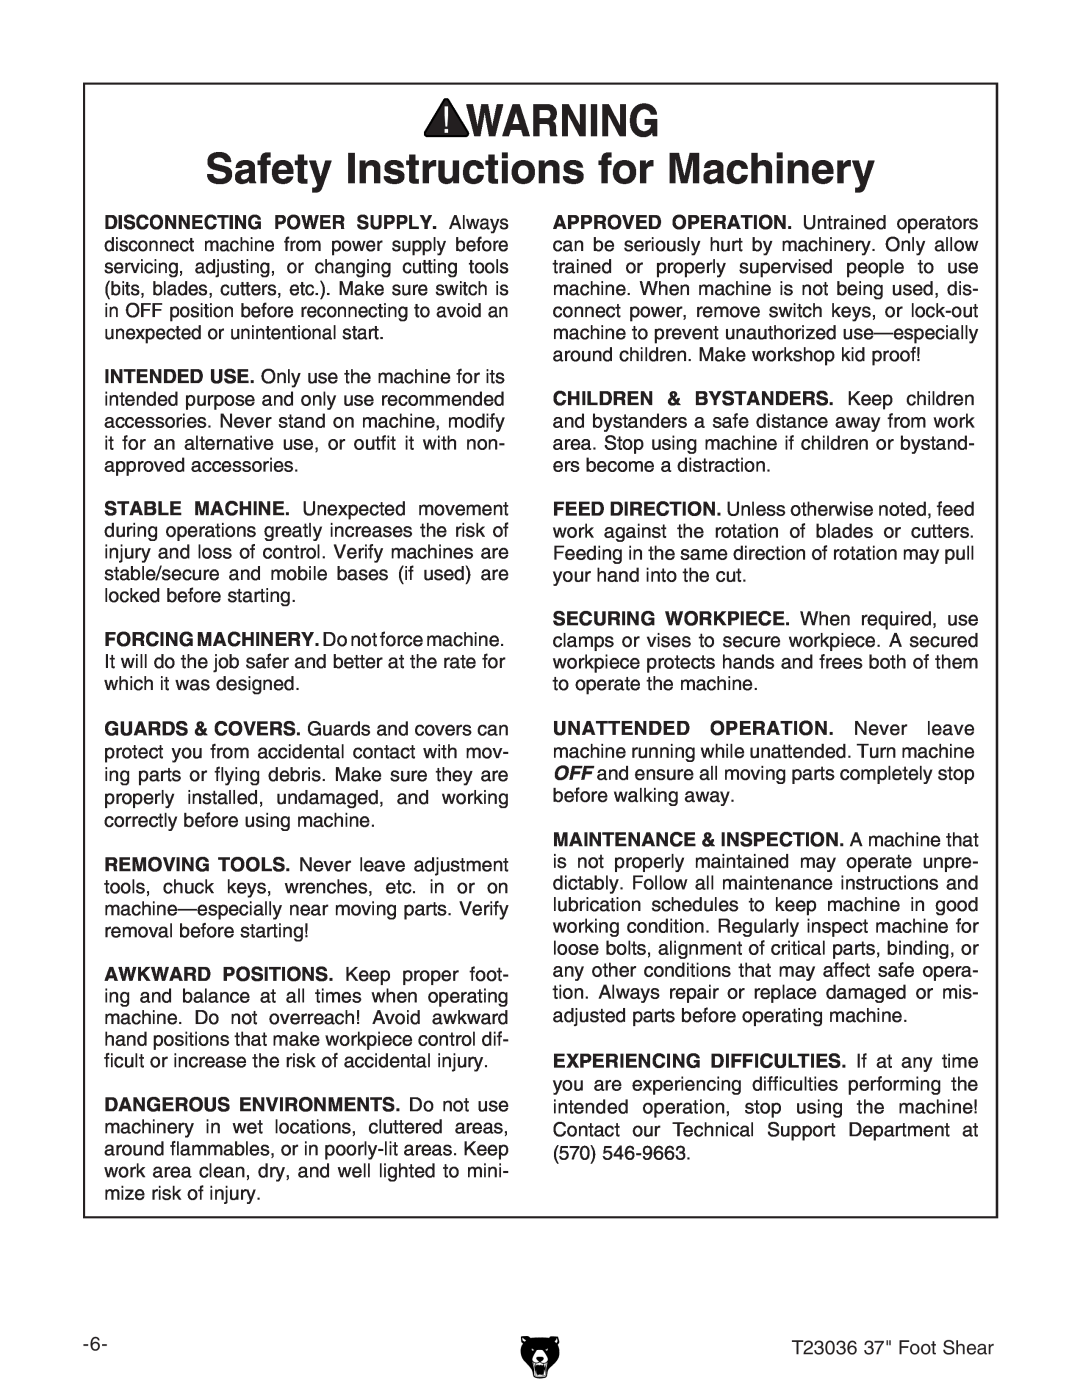 Grizzly T23036 Safety Instructions for Machinery, CHILDREN & BYSTANDERS. @ZZe X aYgZc, ZghWZXdbZVY higVXi dc# 